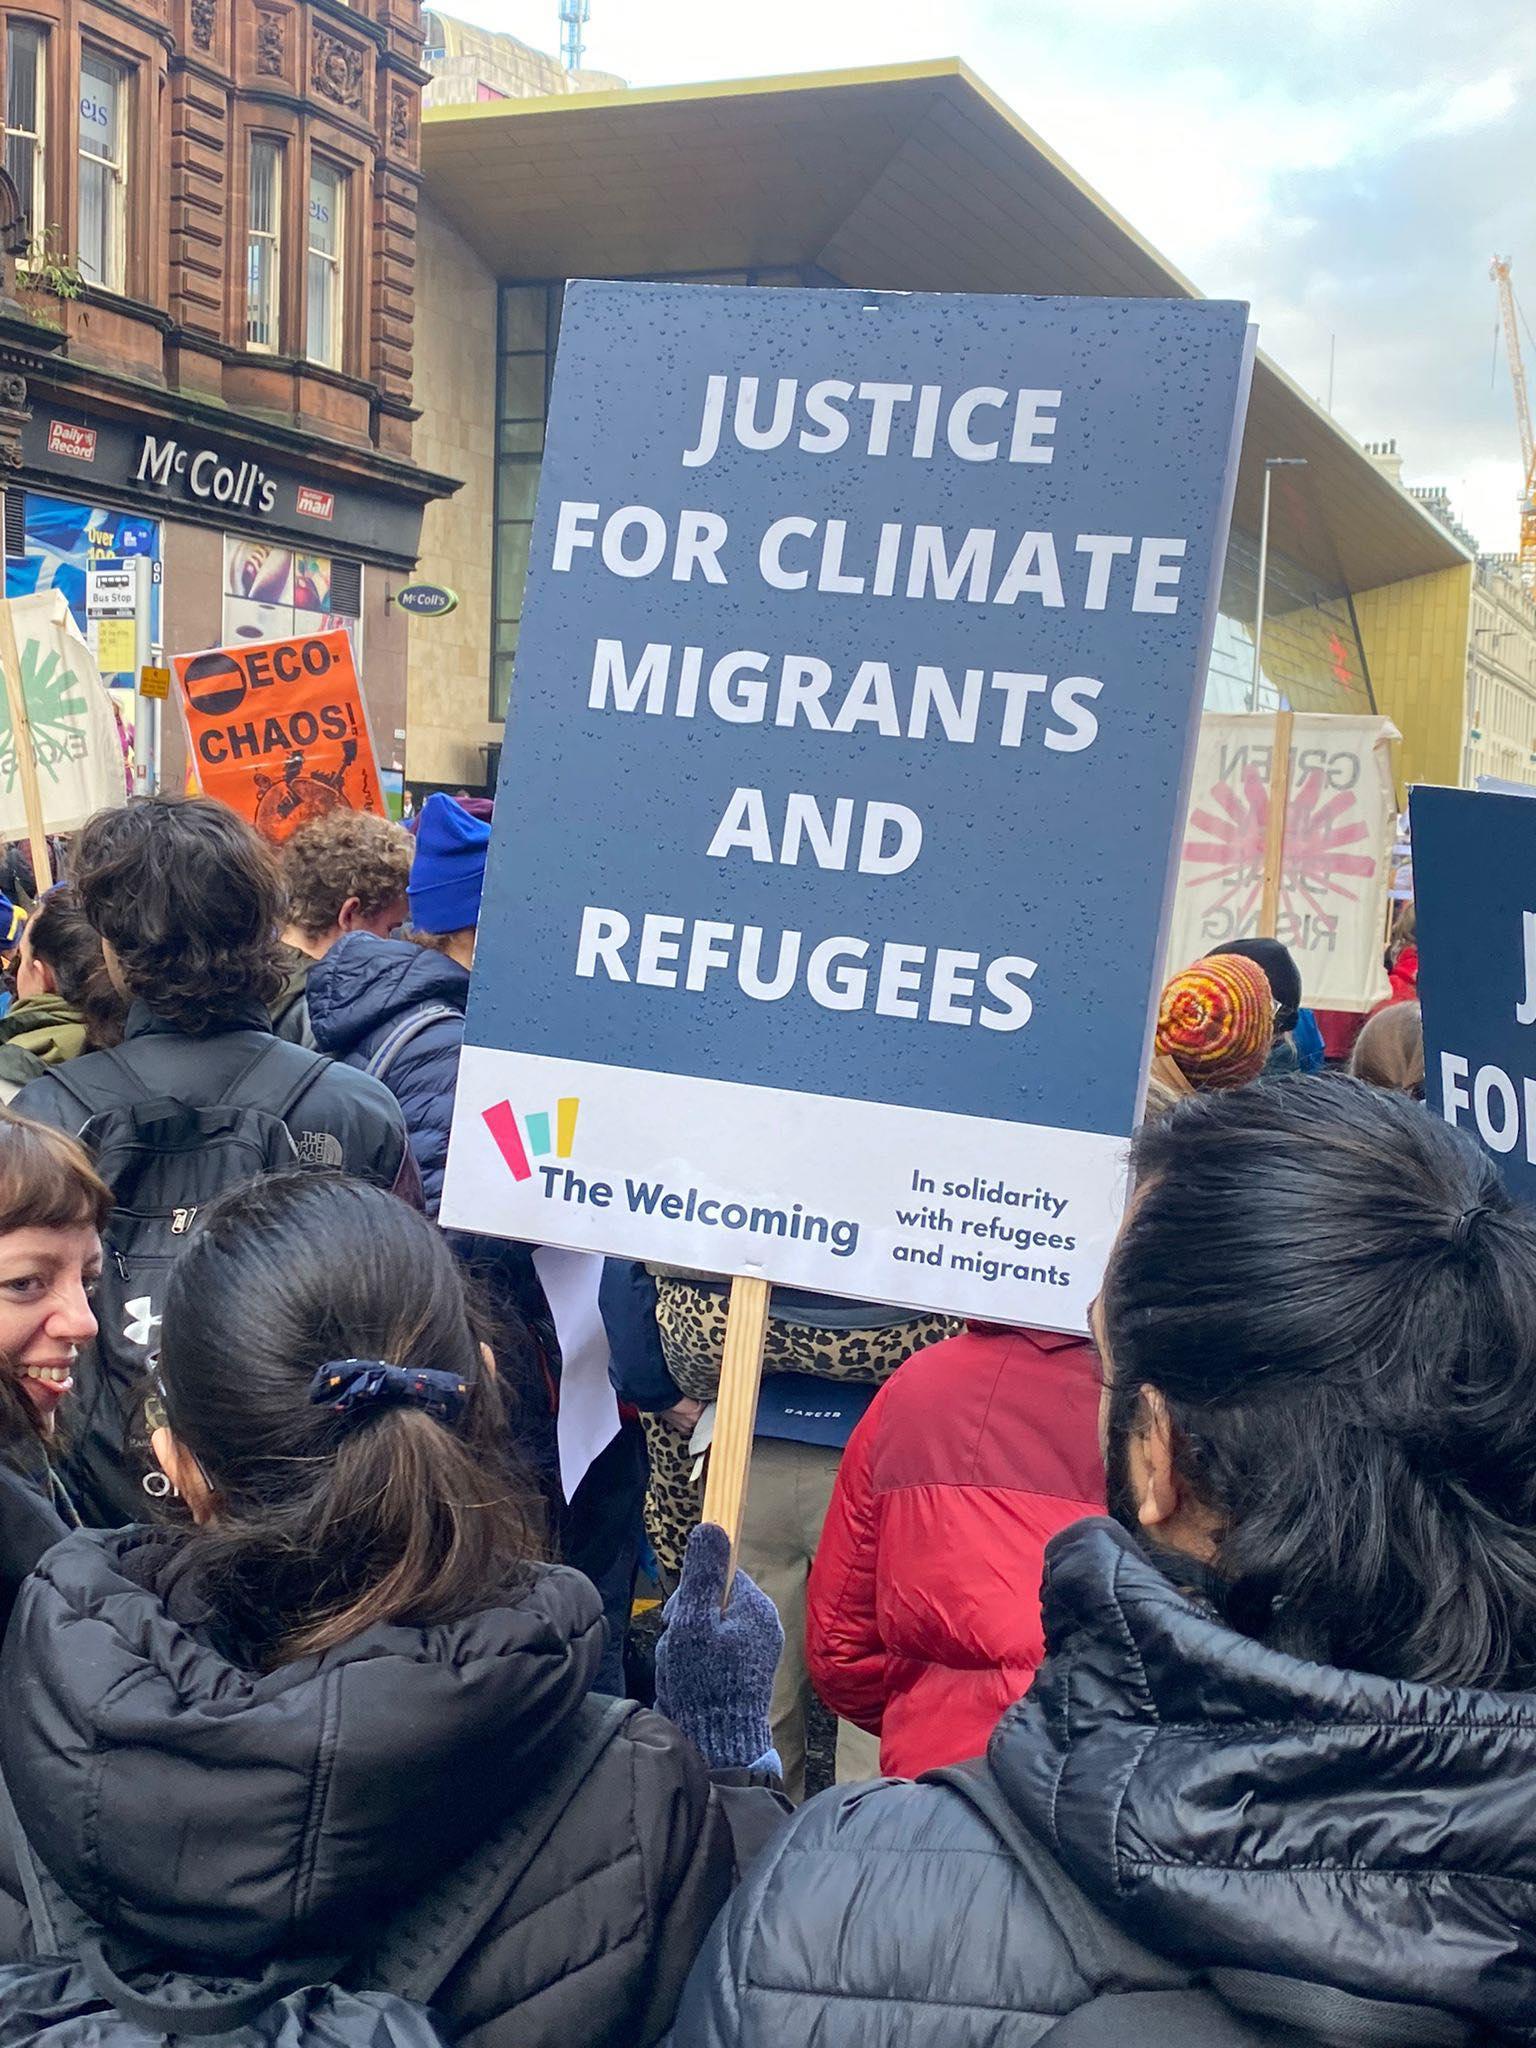 Justice for climate migrants and refugees